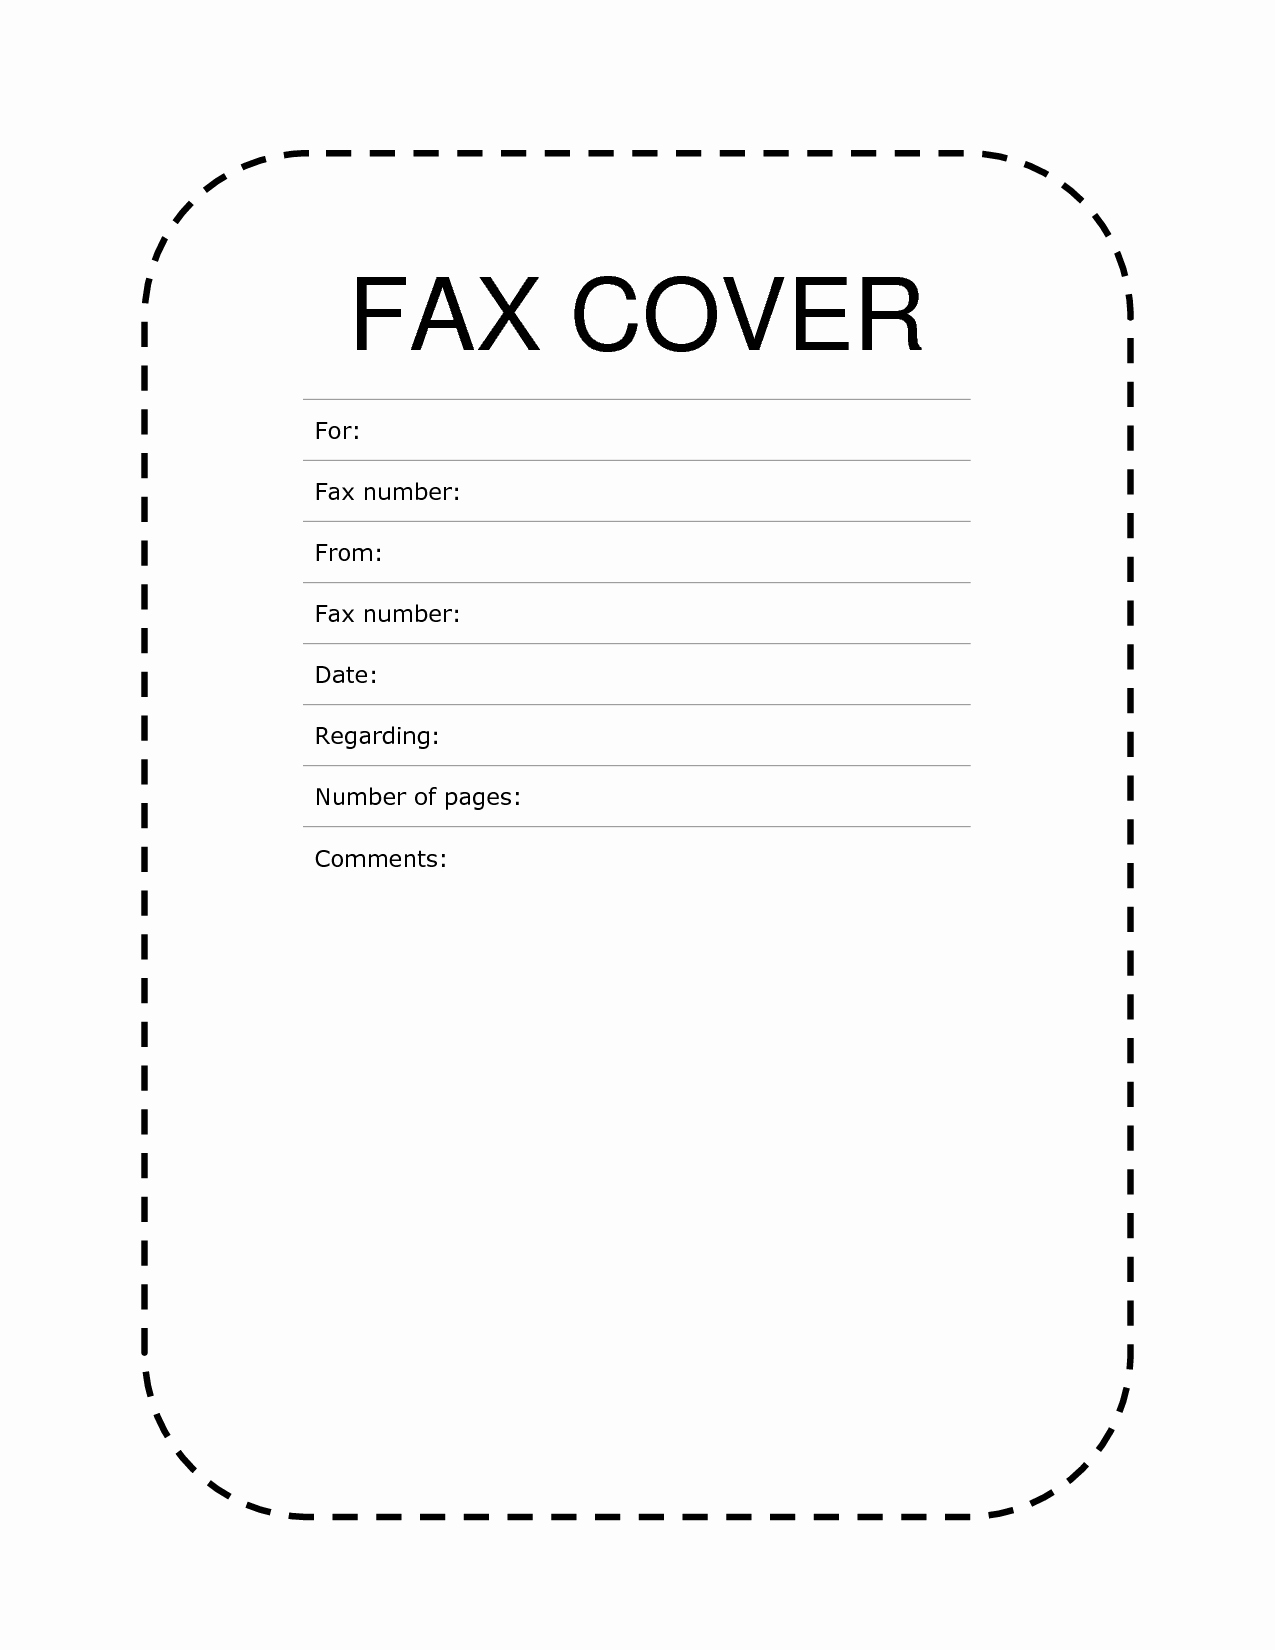 Microsoft Word Cover Letter Templates Luxury [free] Fax Cover Sheet Template